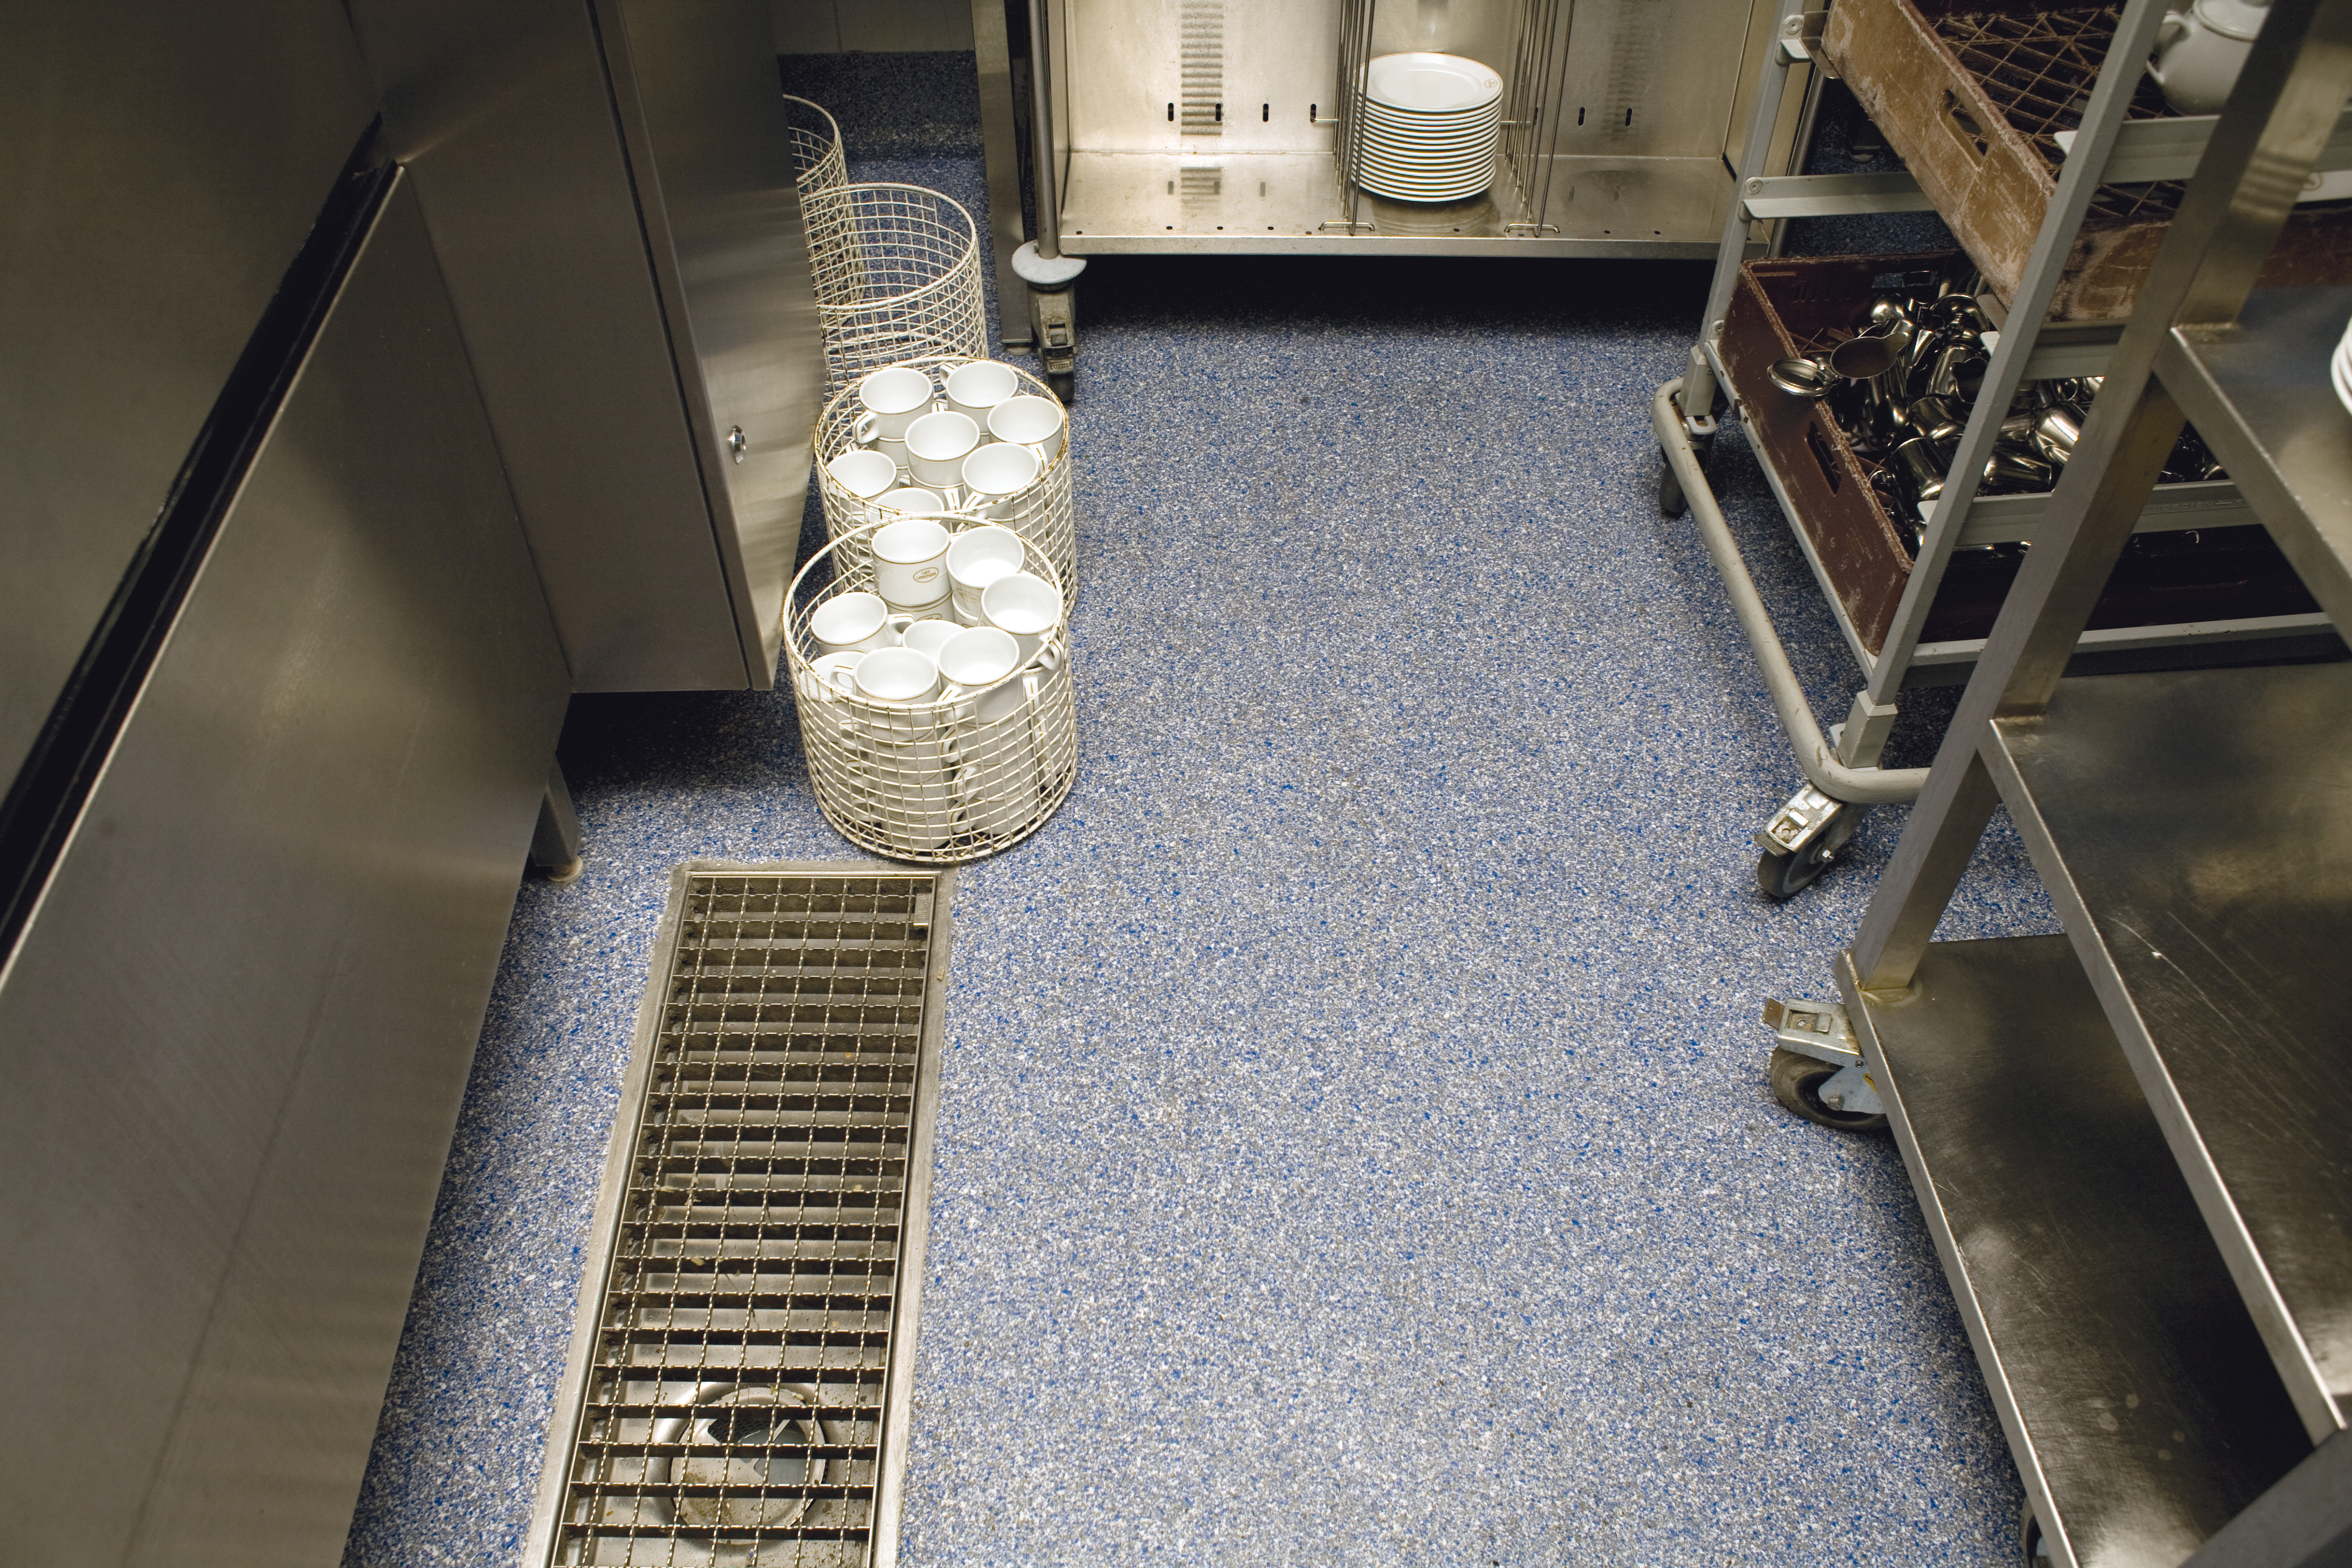 Commercial Kitchen Flooring Best Floors For Commercial Kitchens,Nutty Irishman Drink Recipe